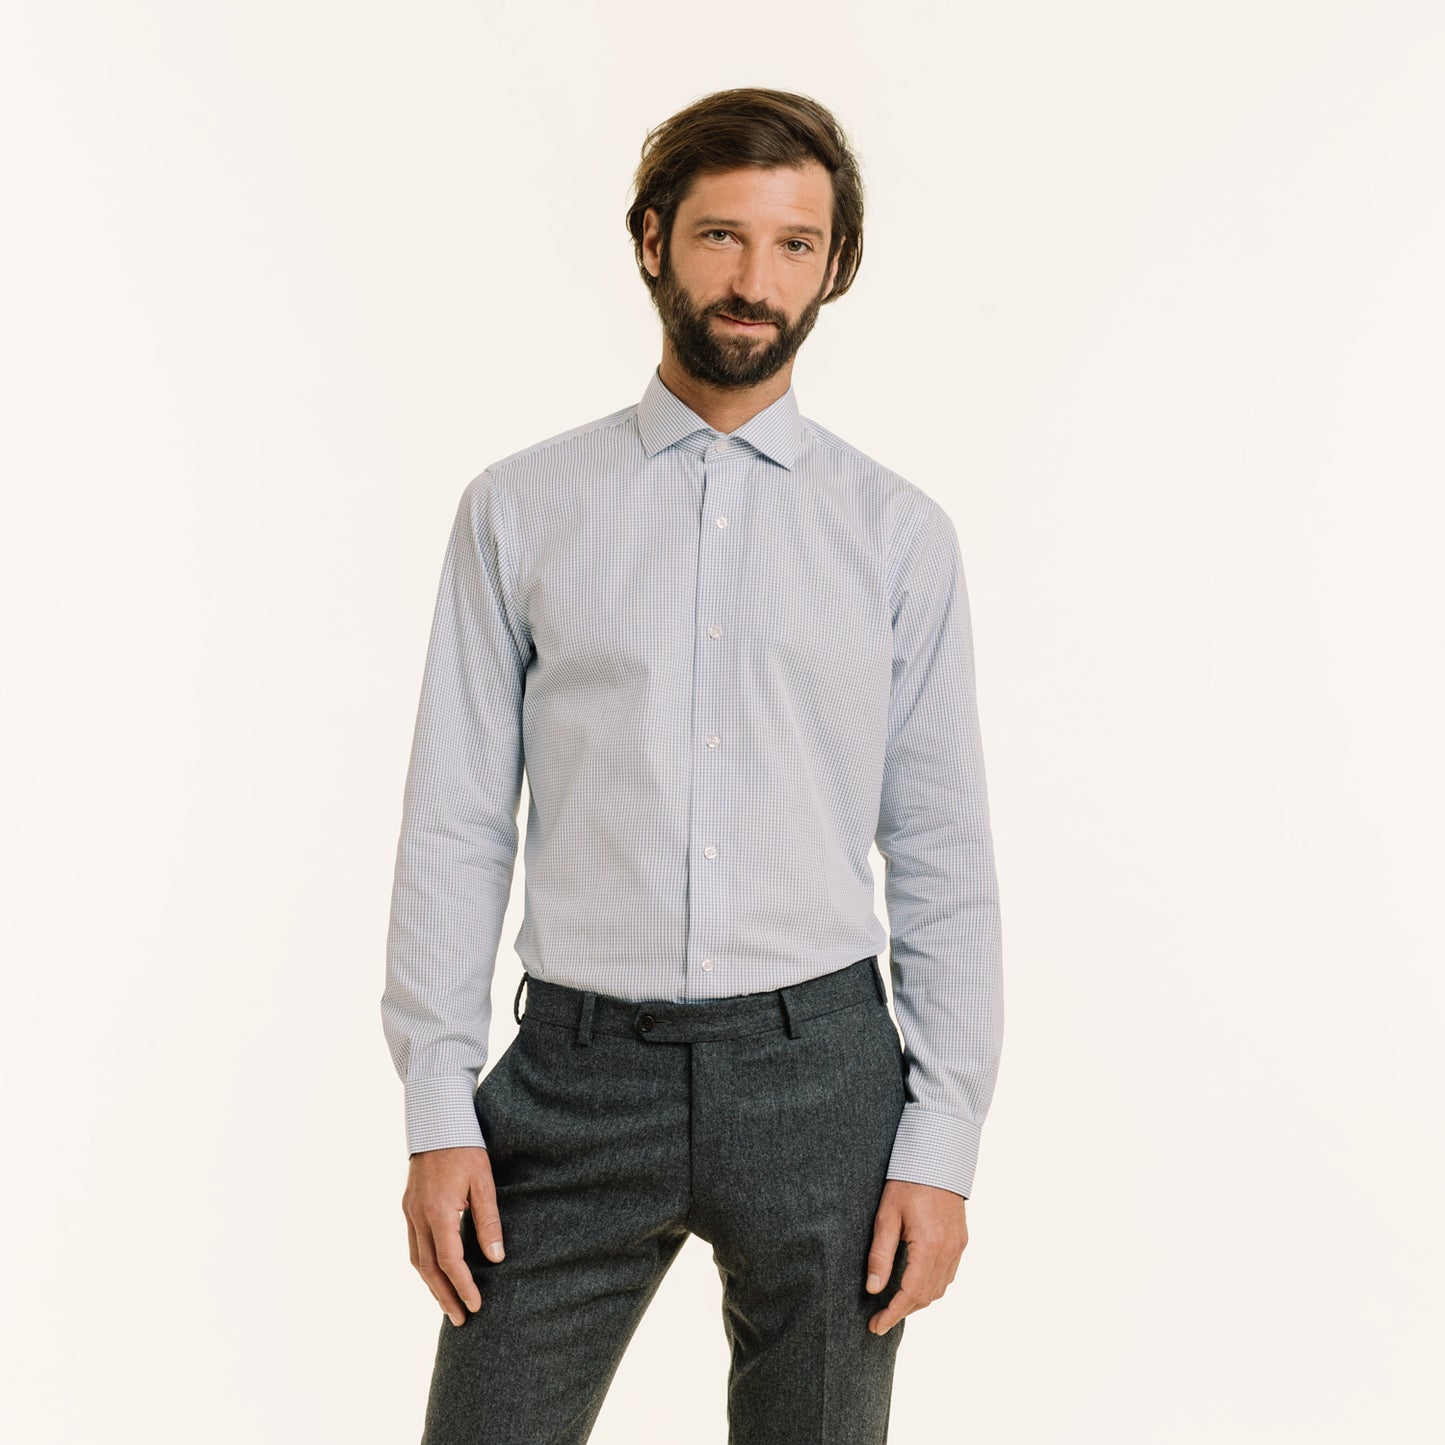 Fitted shirt in double-twisted poplin with dark blue checks